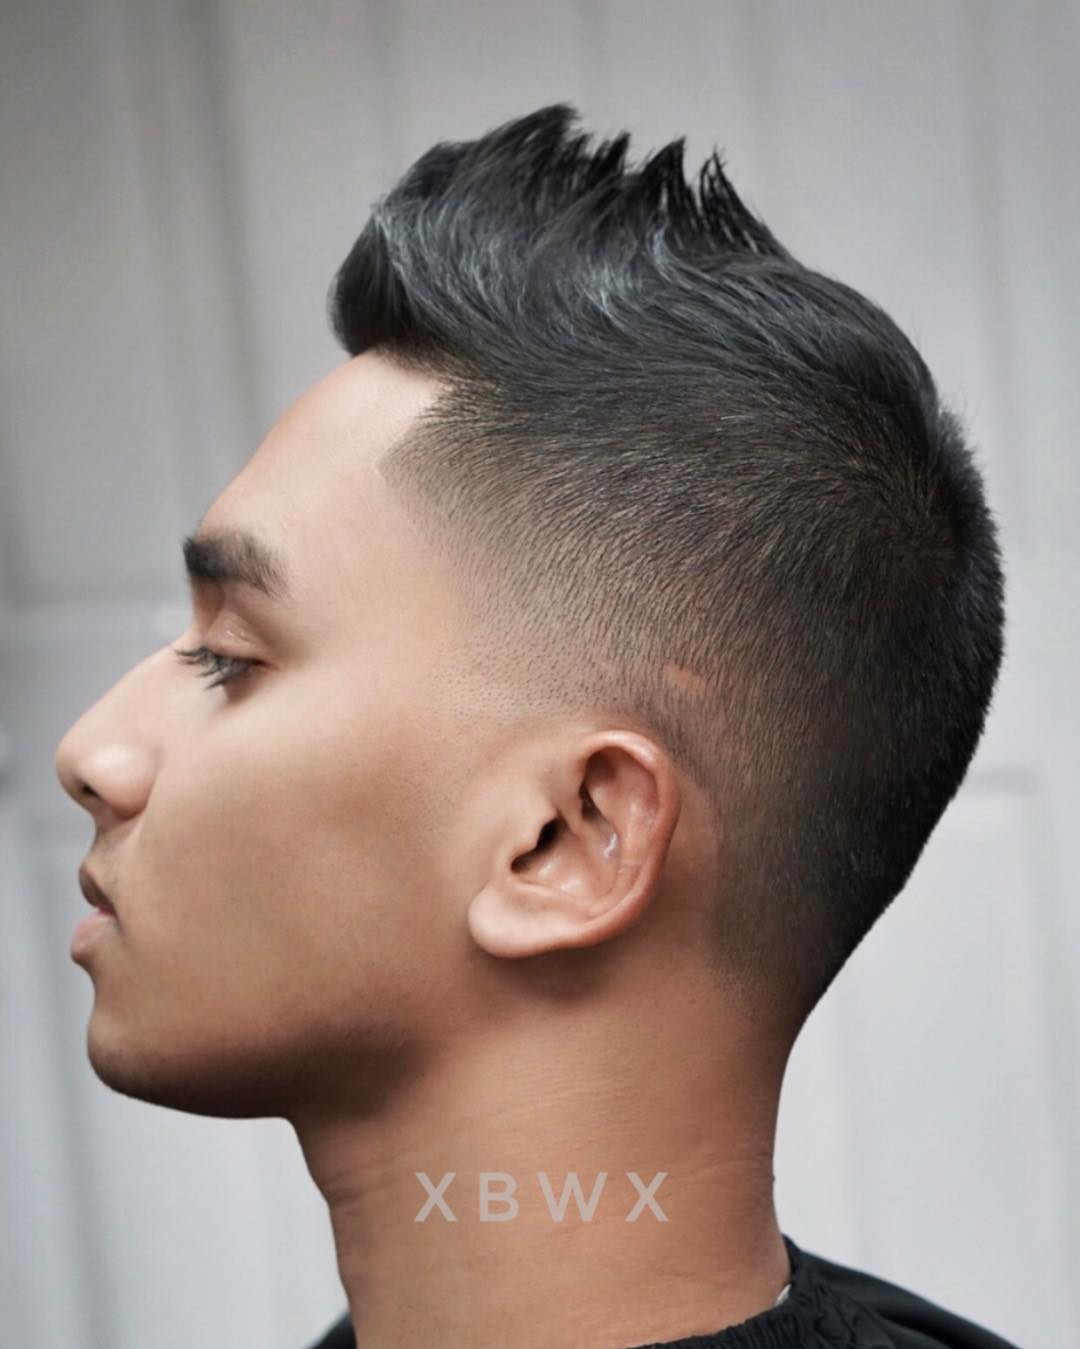 7 Awesome High Fade Haircut Styles – Mack for Men